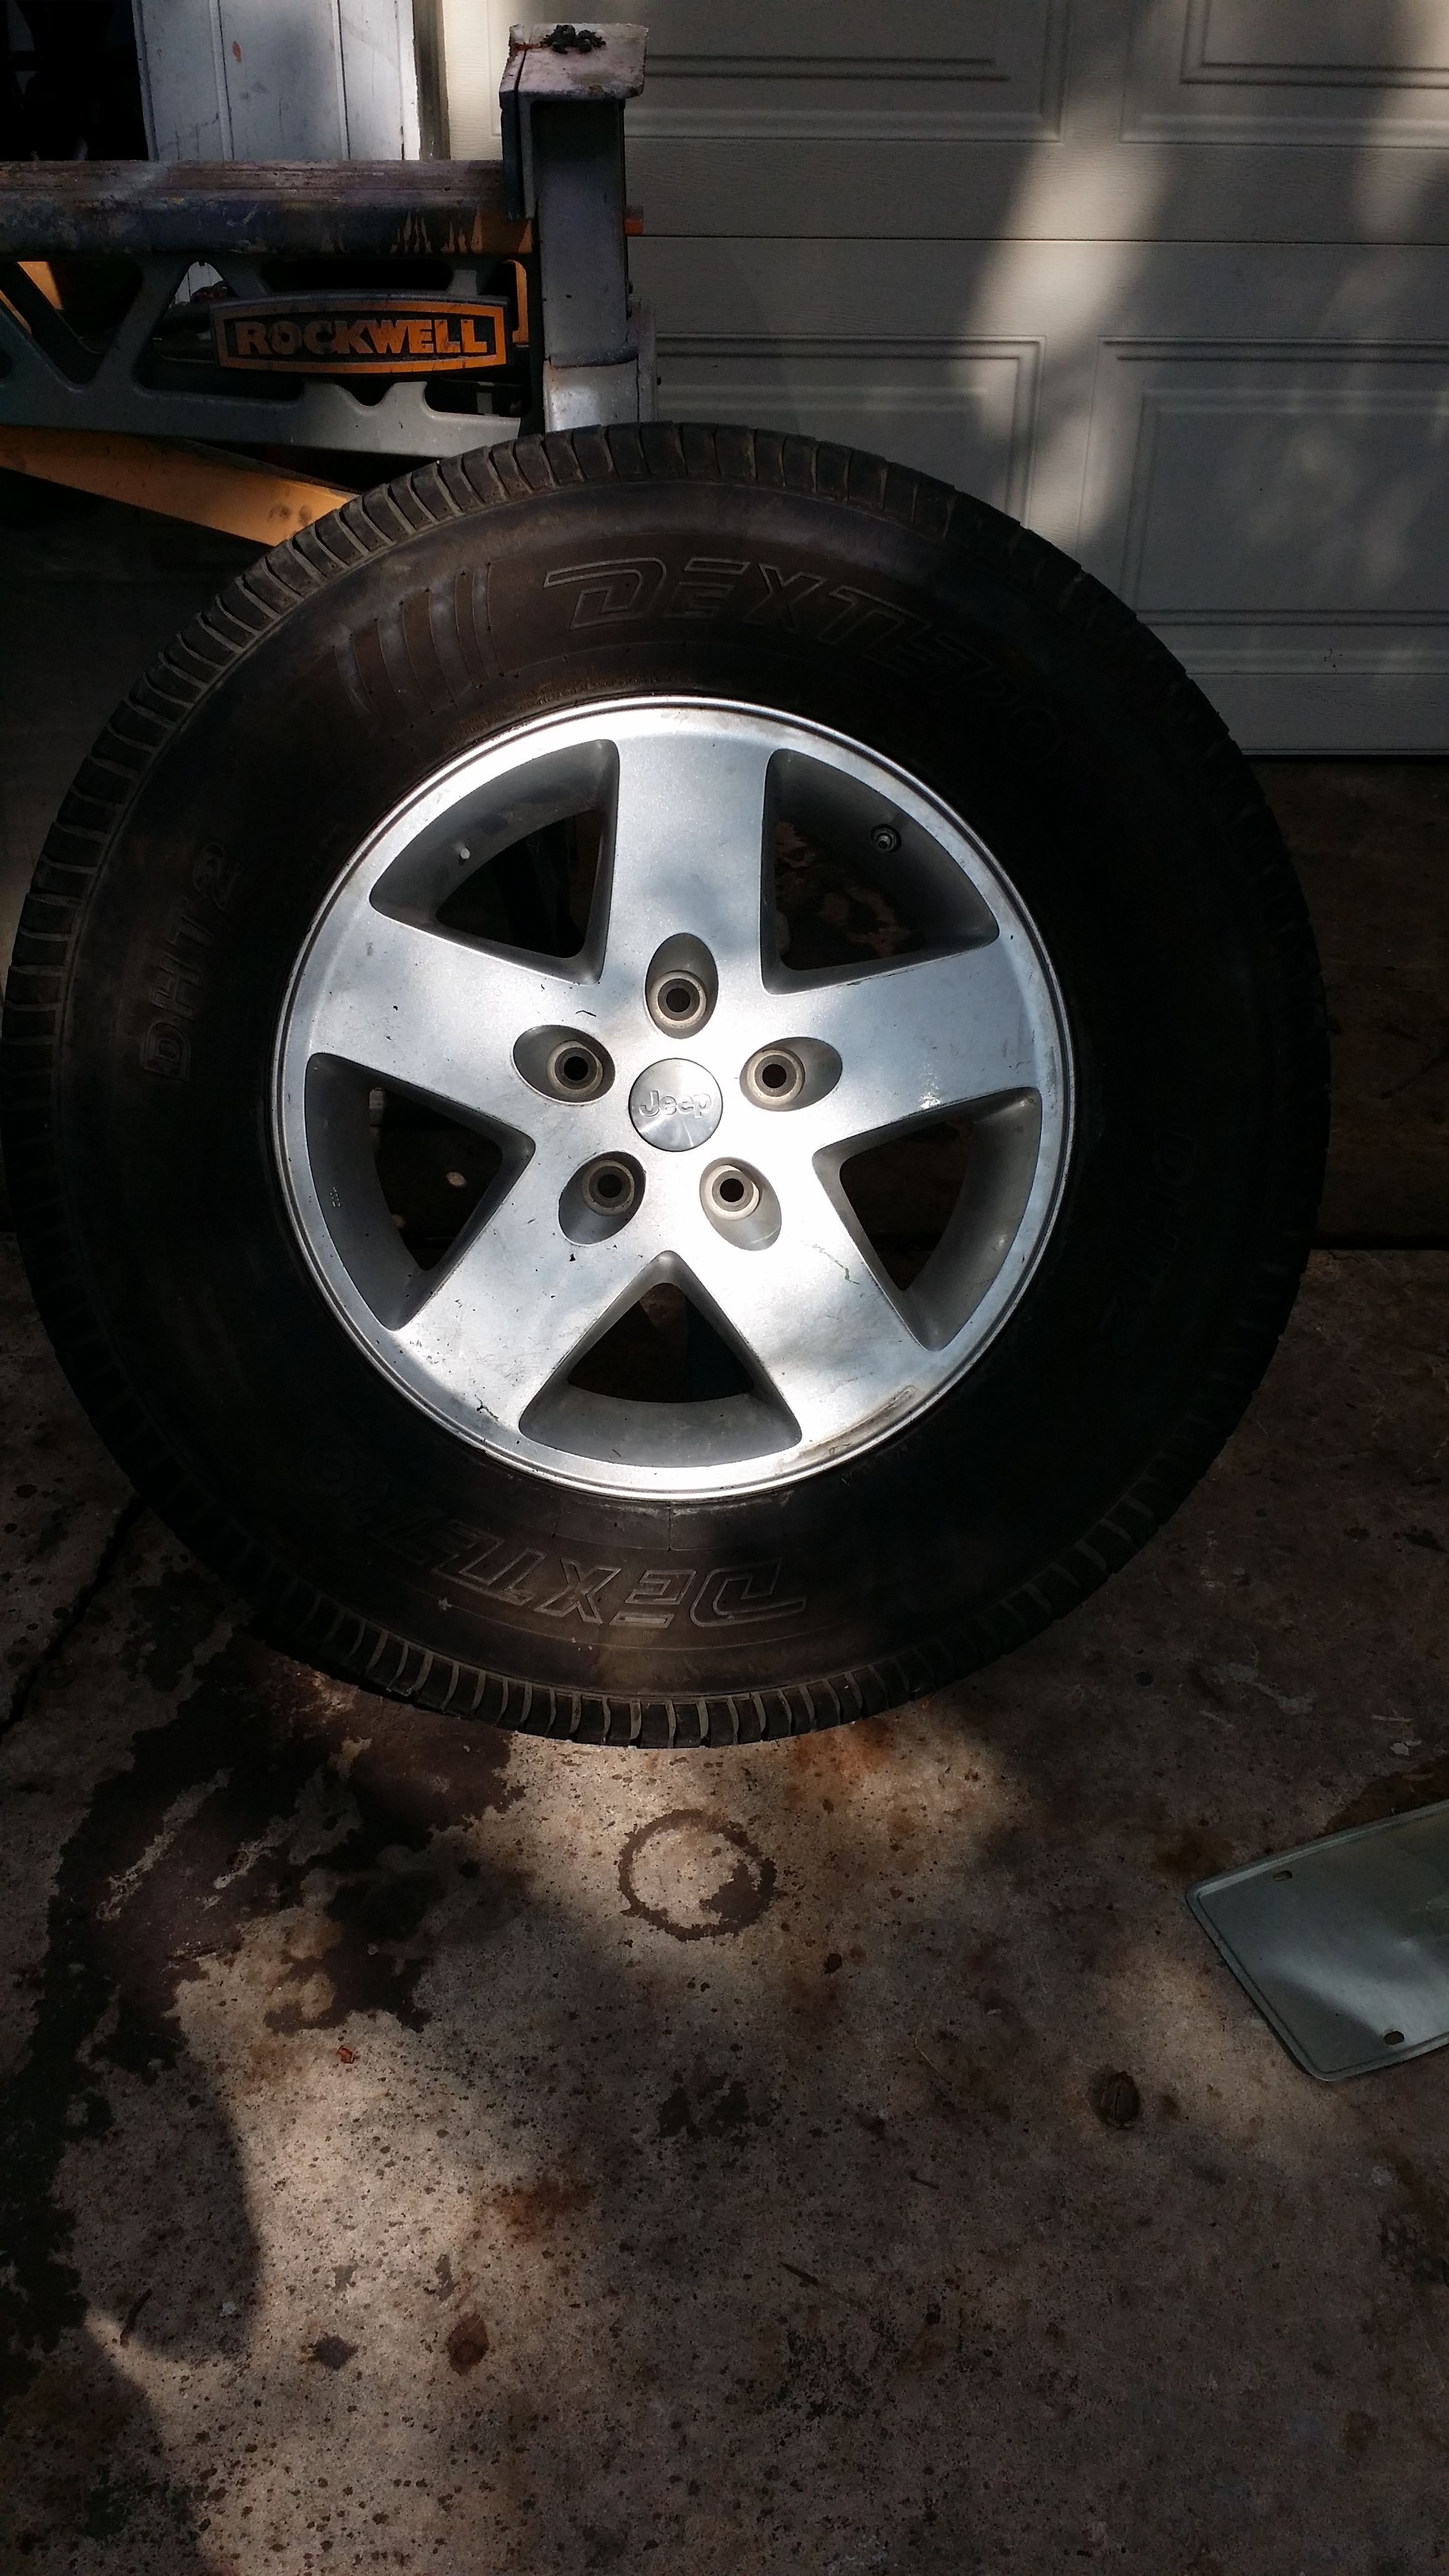 JEEP WHEEL Lt265 70 R17 only 1 left*****(BEST OFFER)***** North East SA TX 78233 Valencia neighborhood